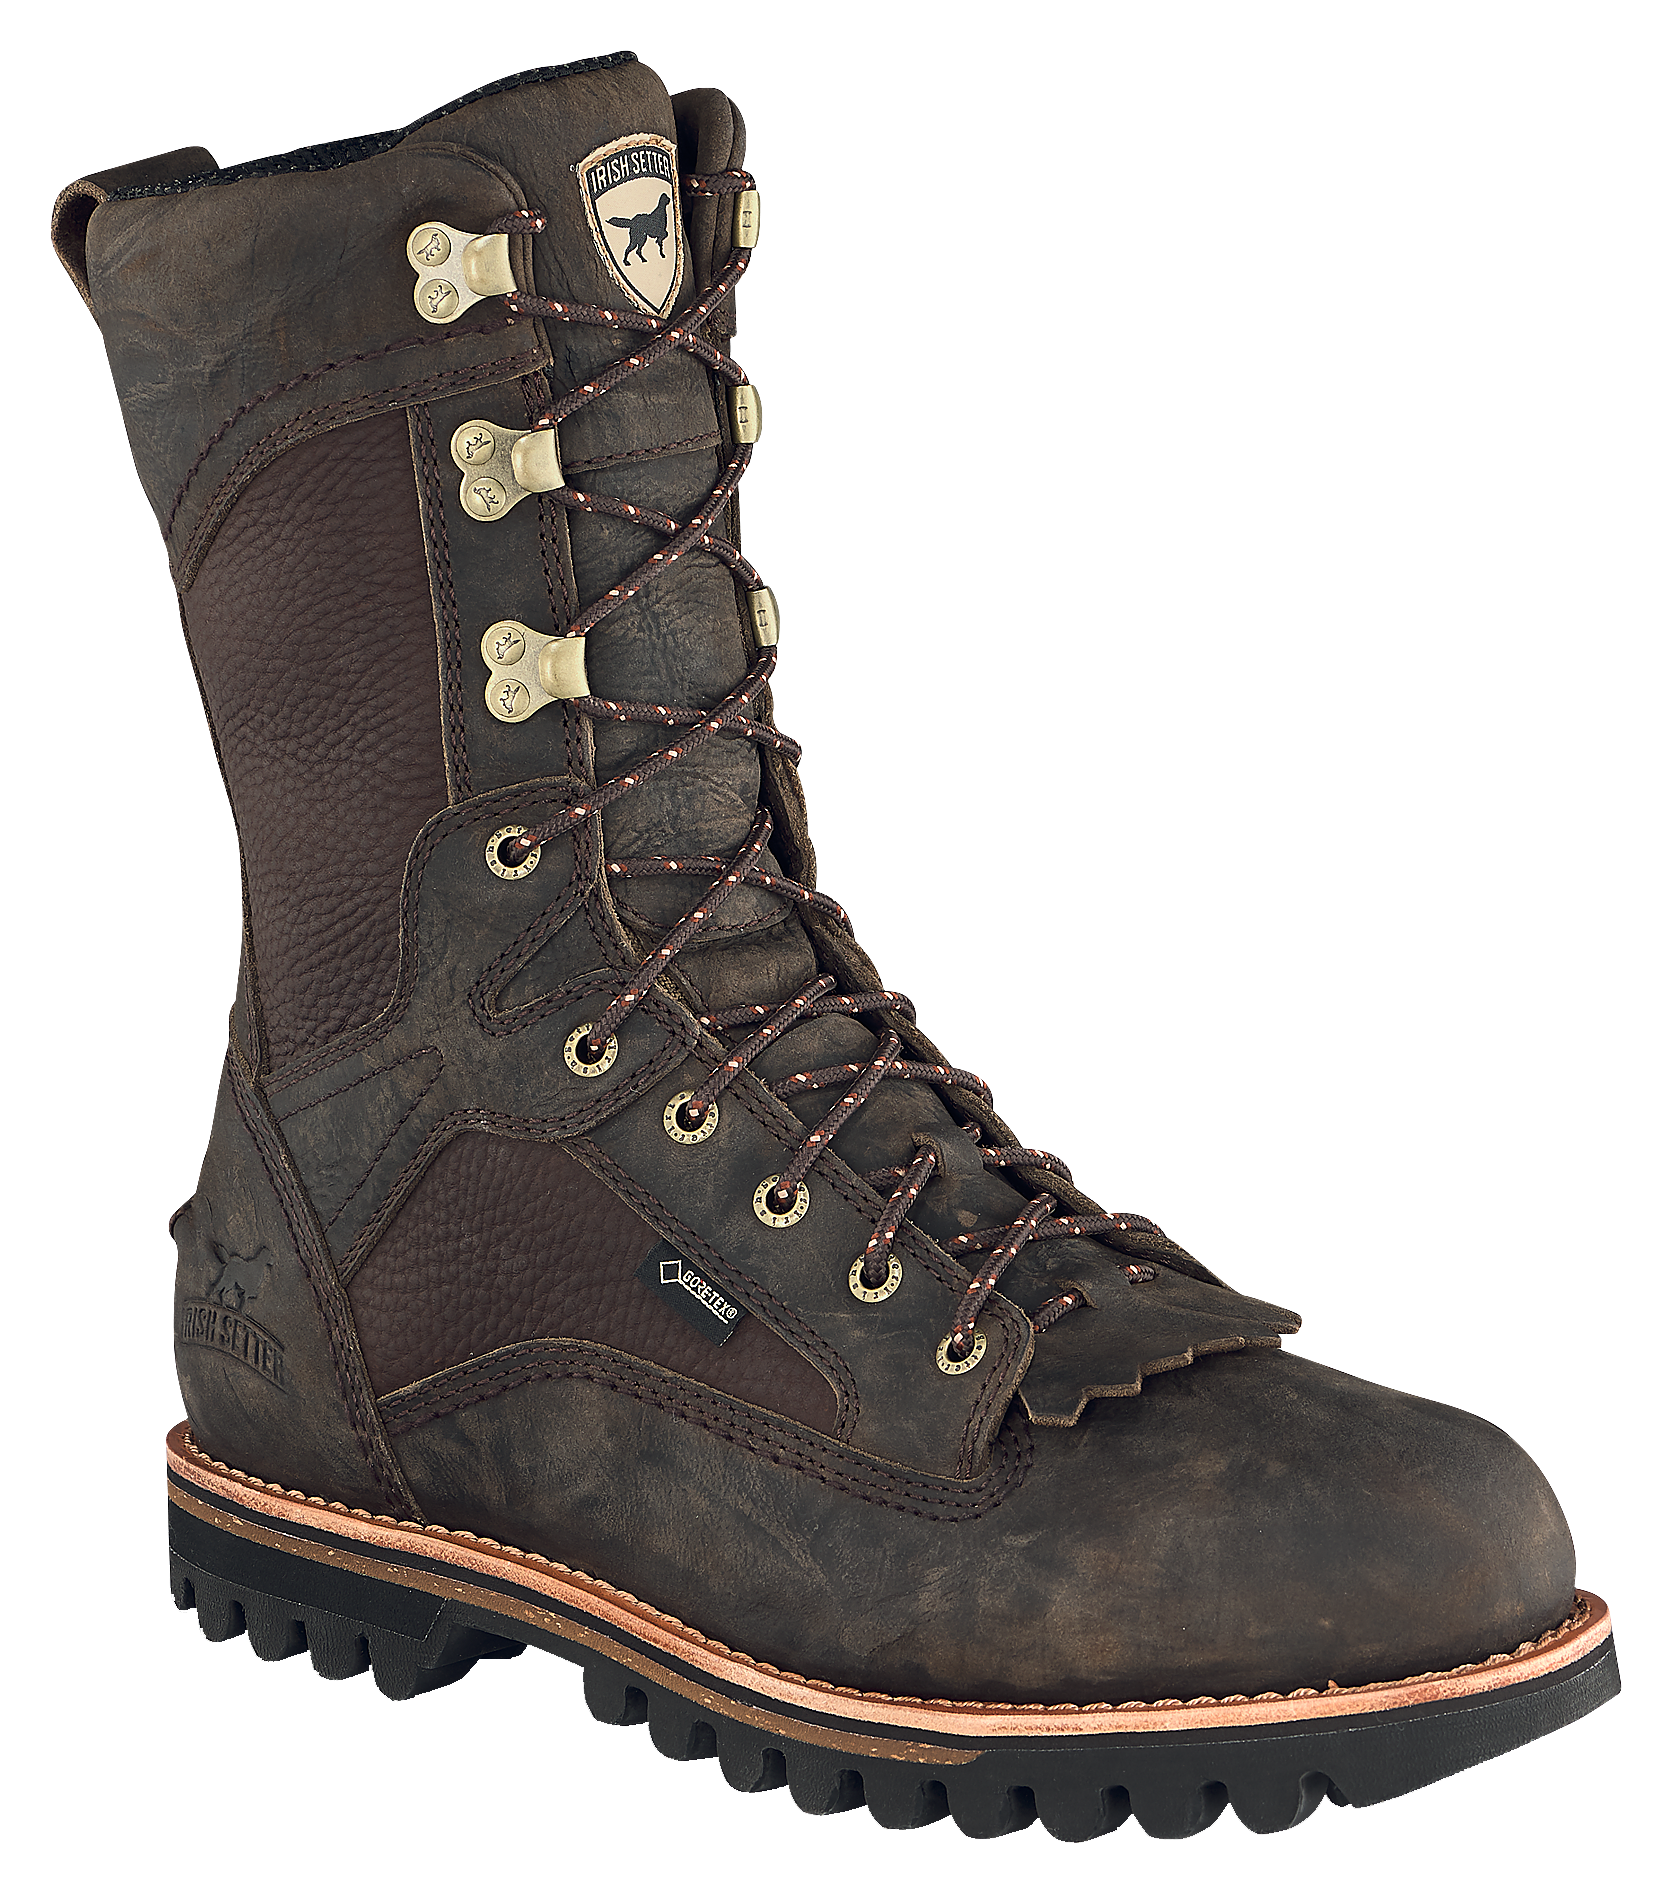 Irish Setter Elk Tracker GORE-TEX Insulated Hunting Boots for Men - Brown - 11M